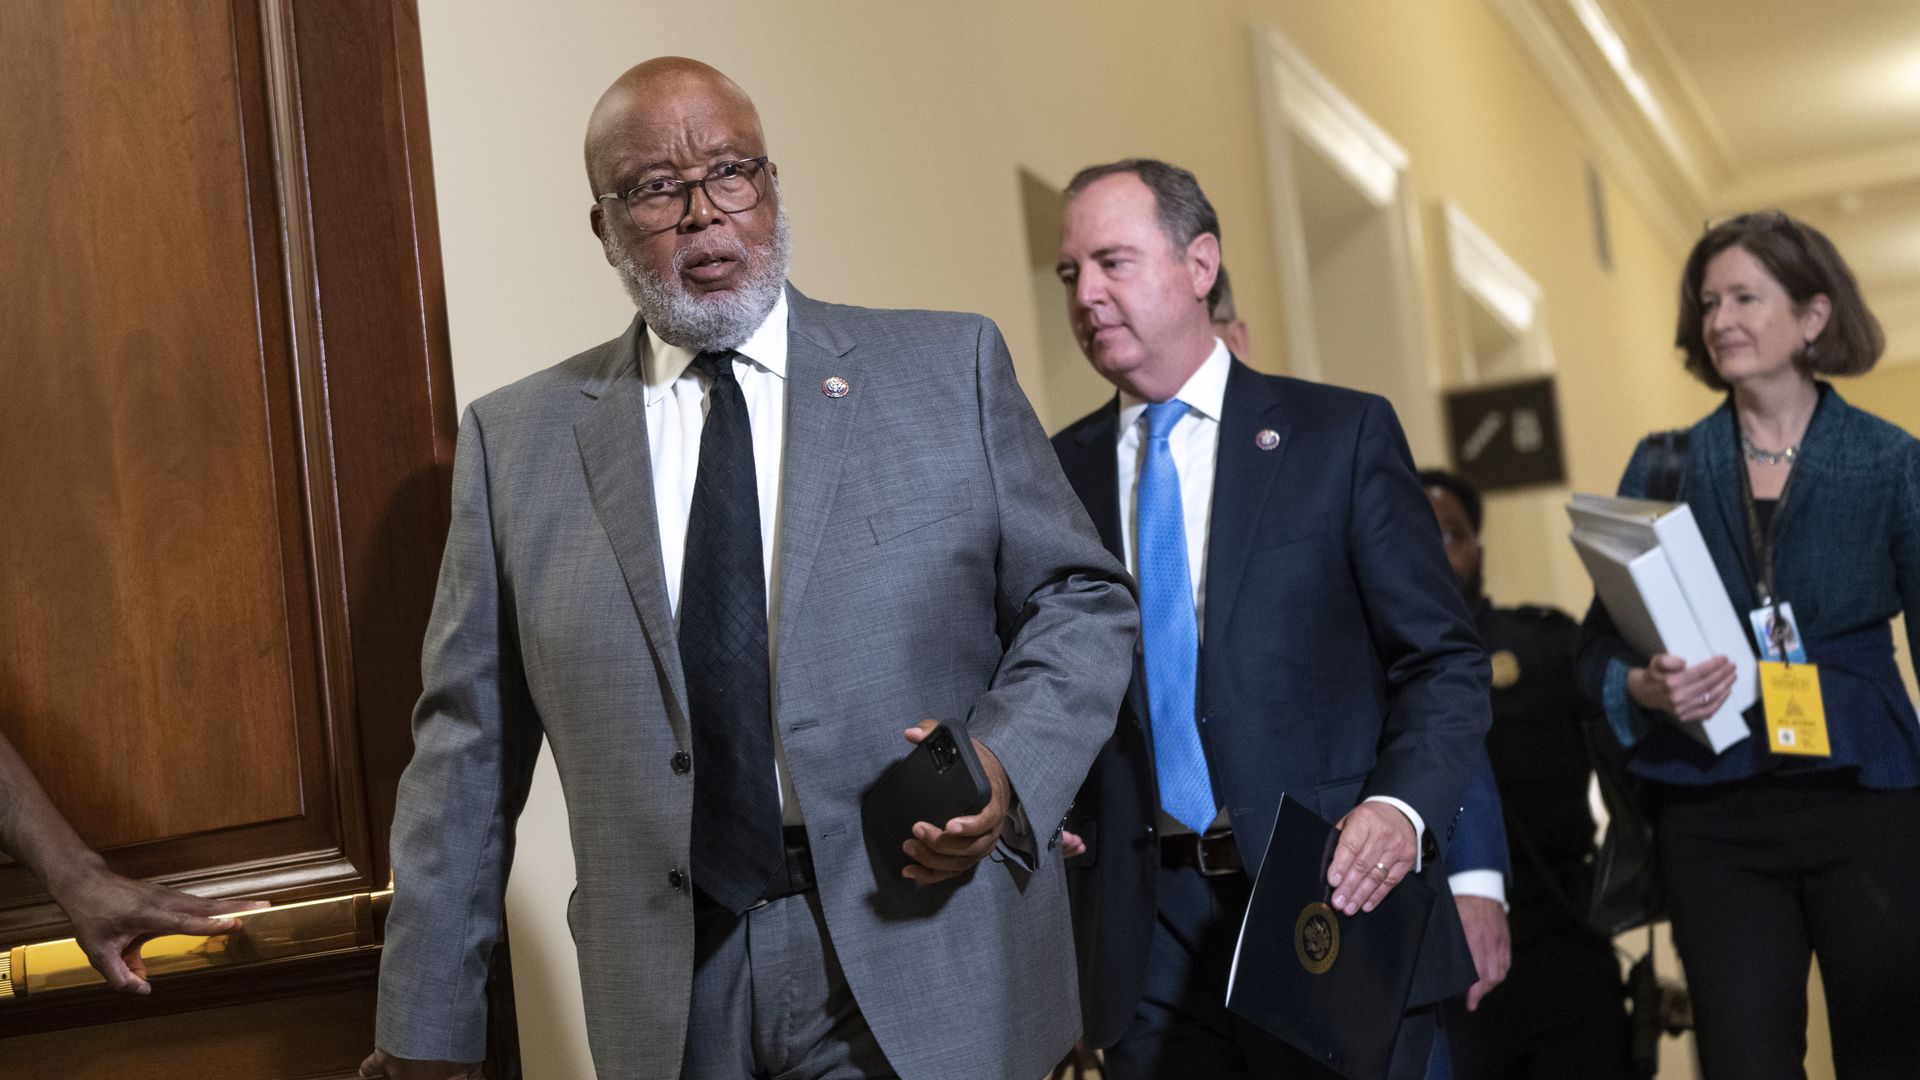 Rep. Bennie Thompson, wearing a gray suit, white shirt and dark blue tie, and Adam Schiff, wearing a dark blue suit jacket, white shirt and light blue tie, walking in a House office building hallway.